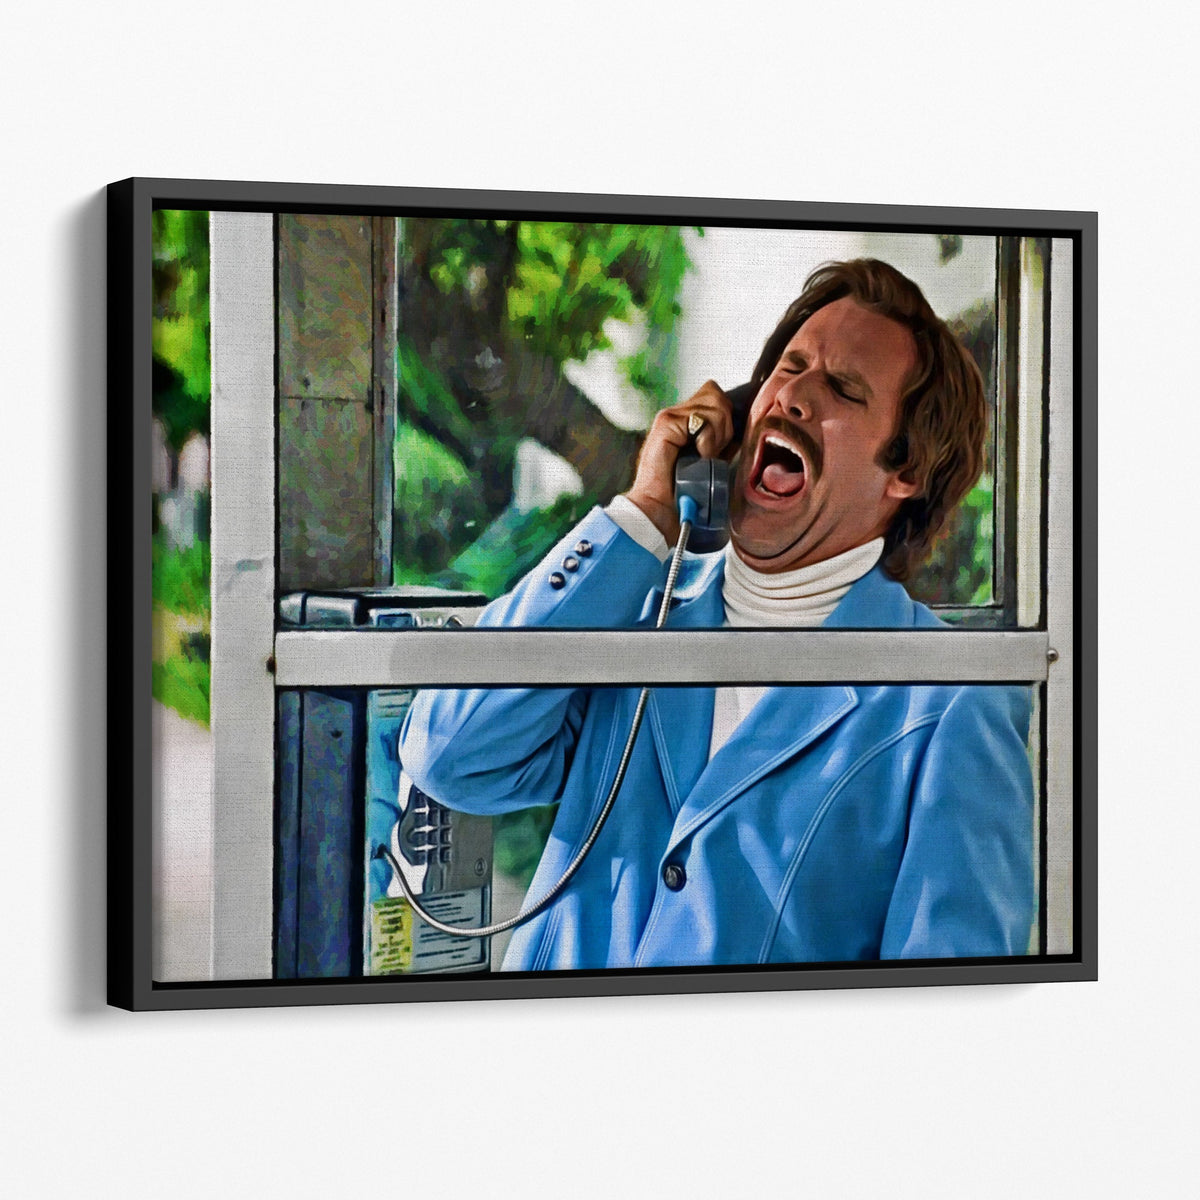 Anchorman Glass Case Of Emotion Canvas Sets